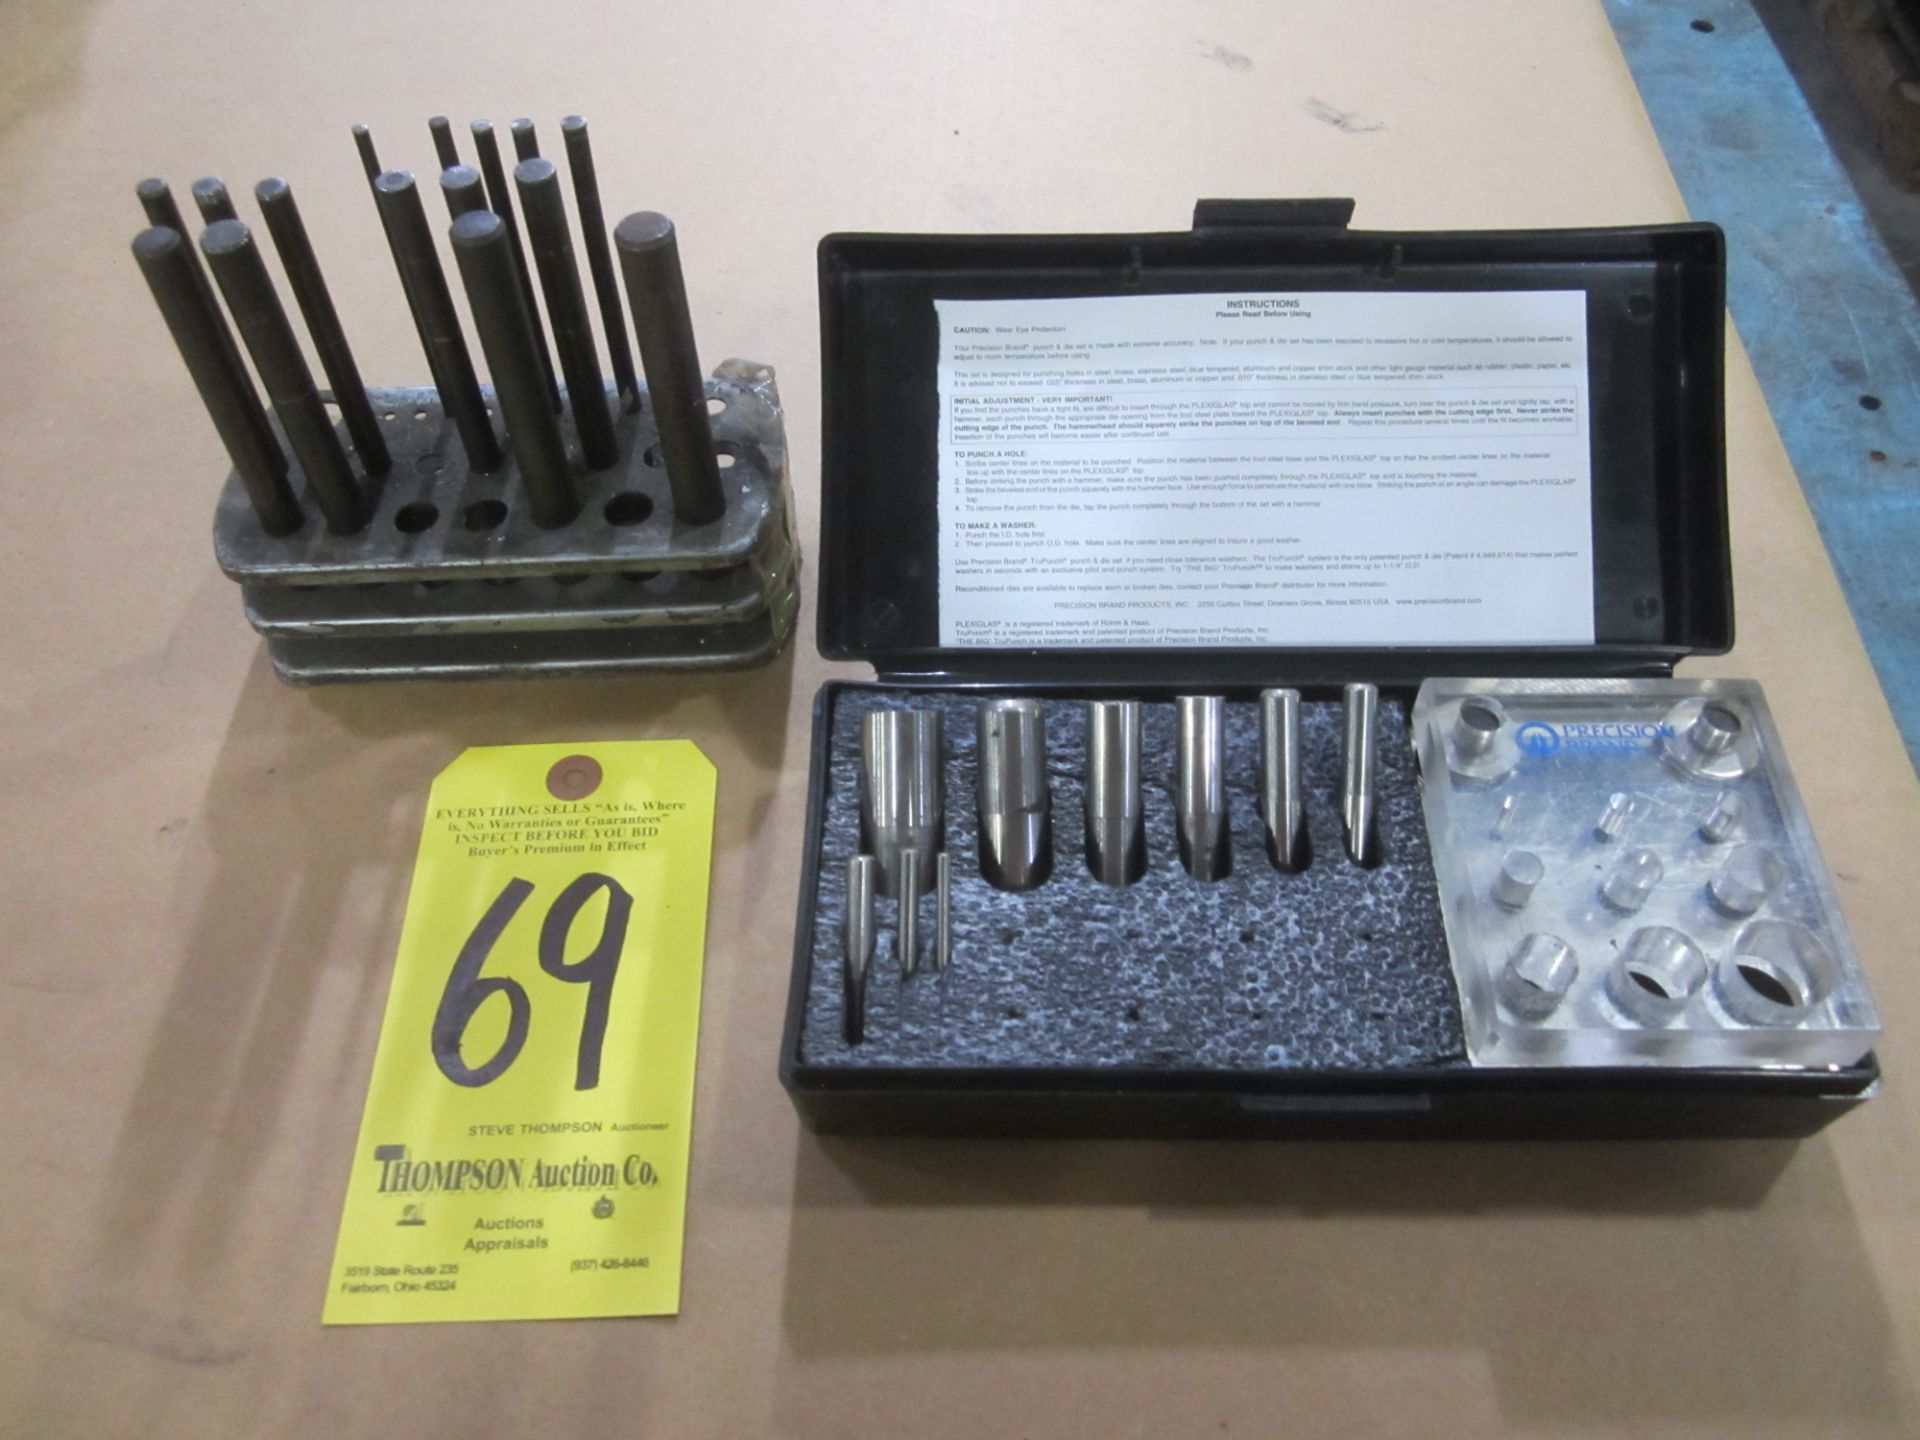 Center Punches and Precision Brand Punch and Die Set